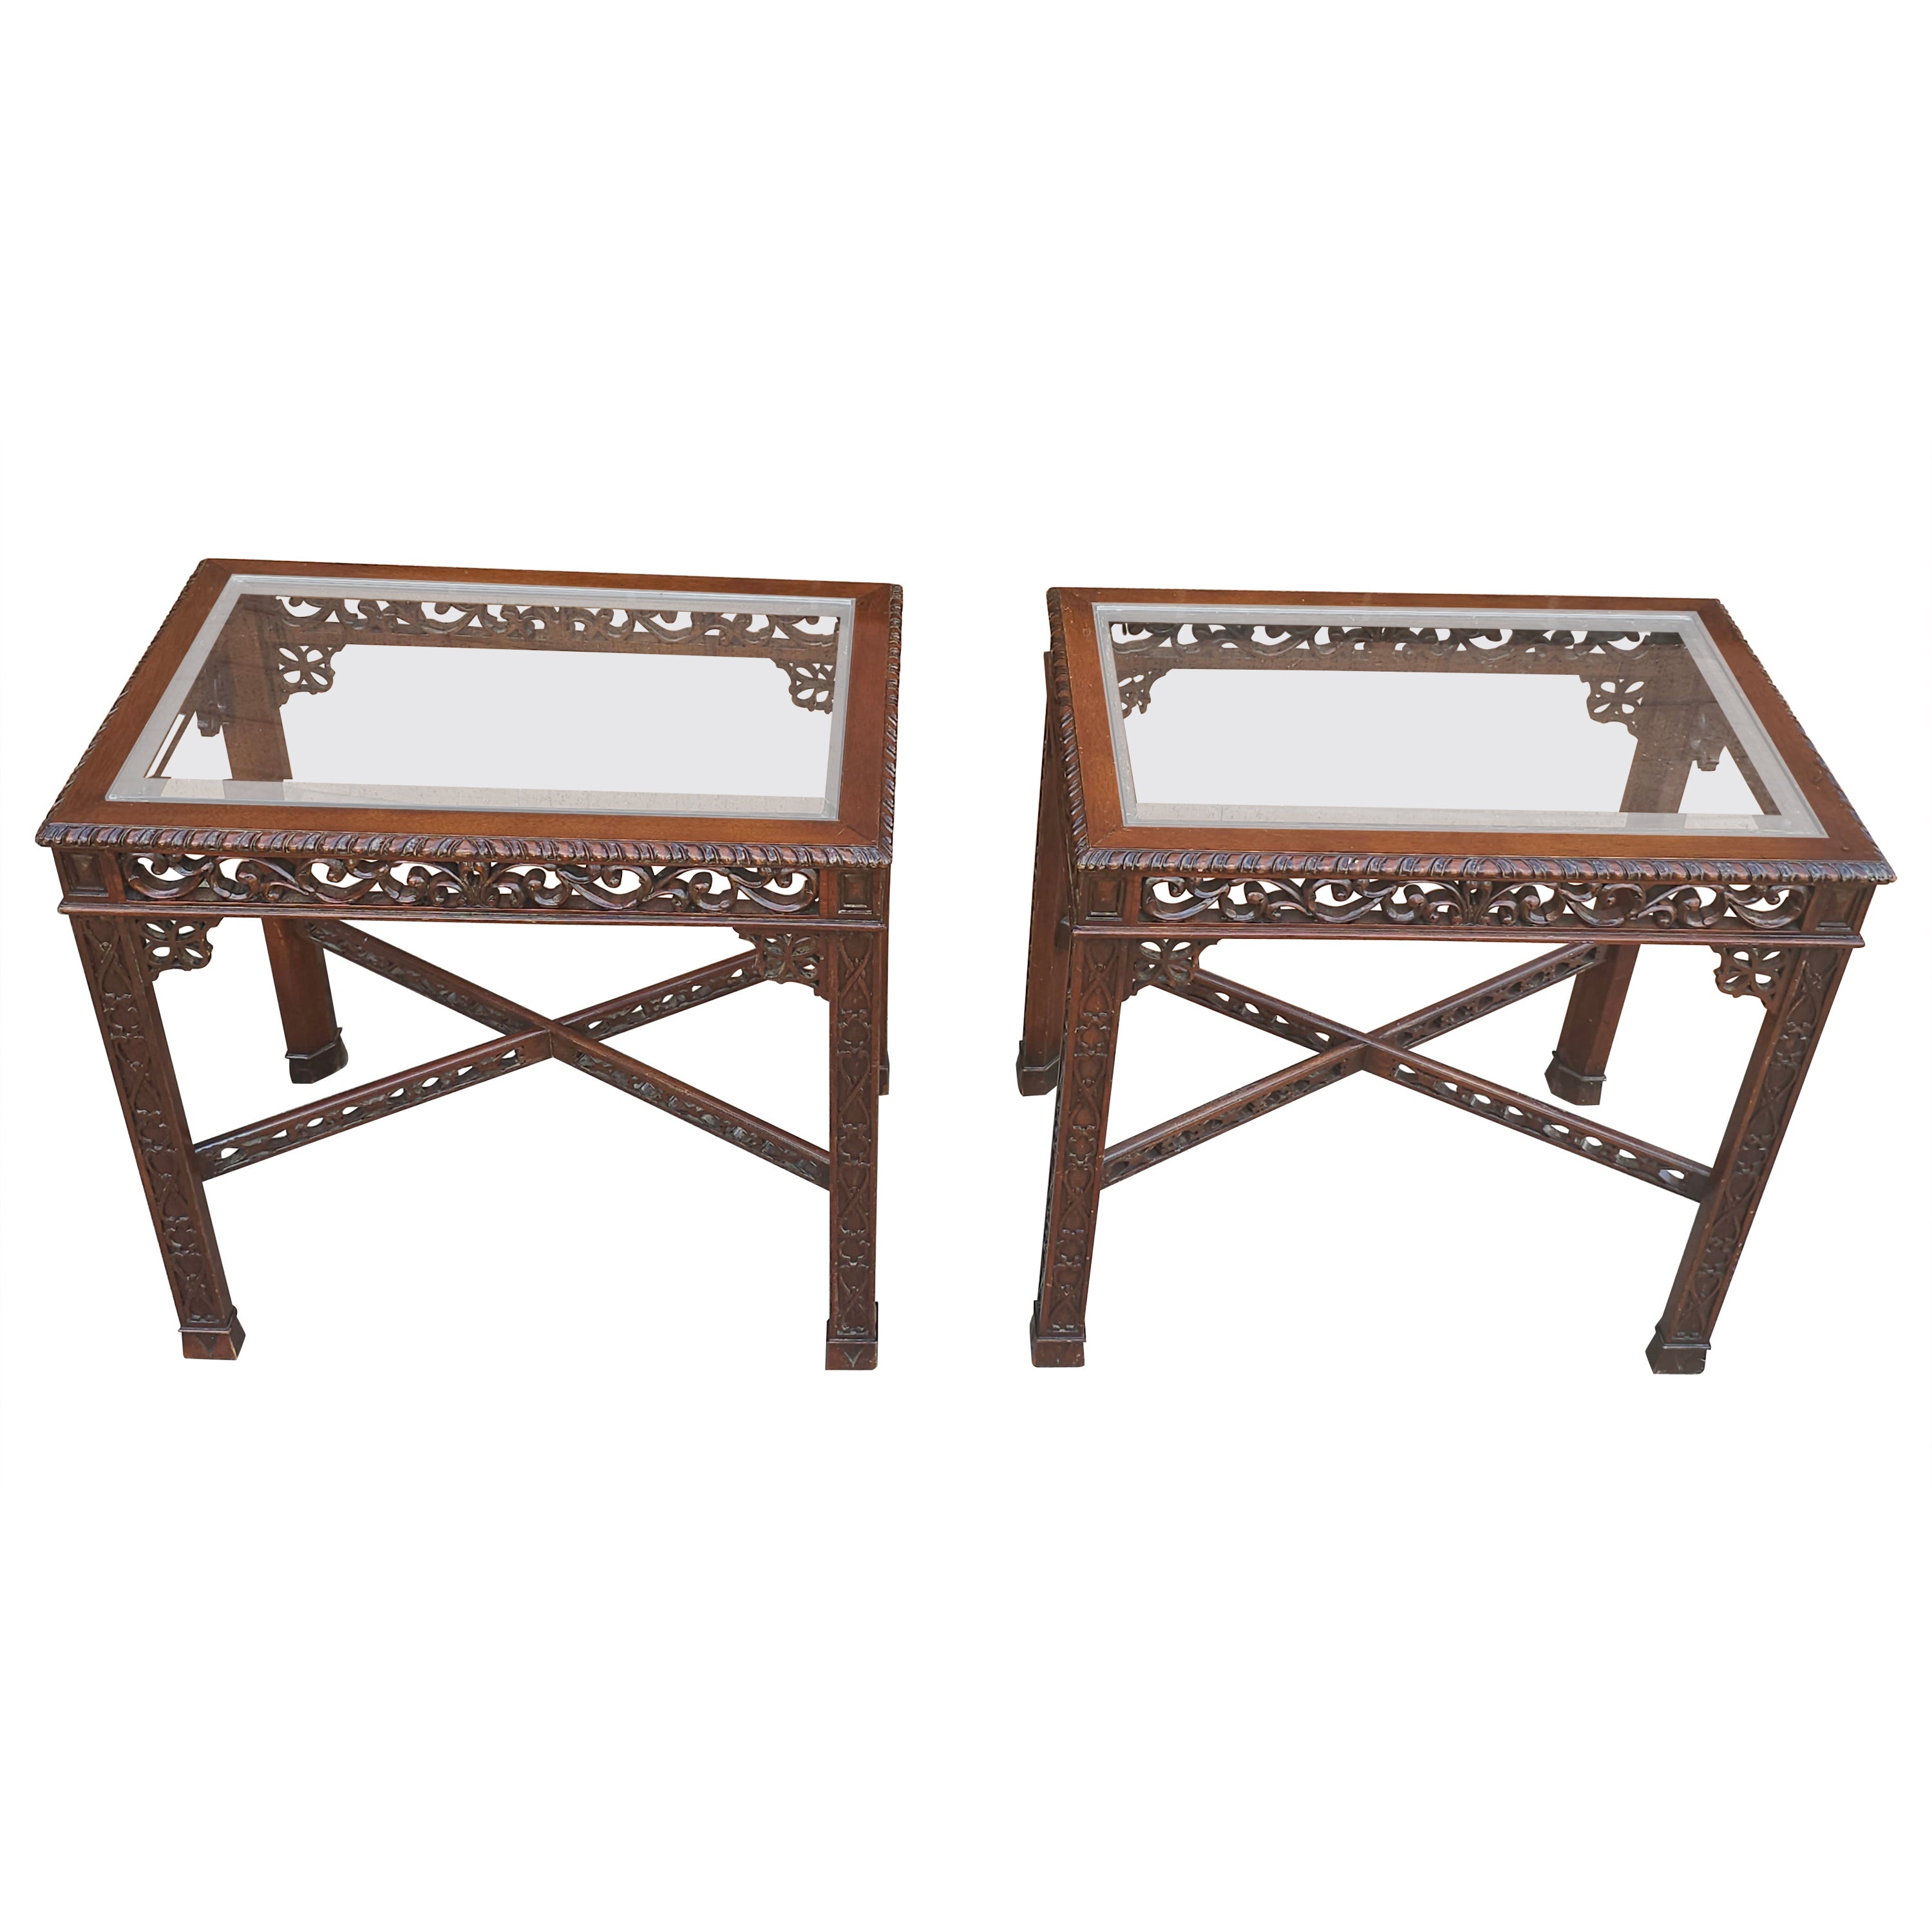 Pair Of Chinese Chippendale Style Fretwork and Glass Inset Mahogany Side Tables For Sale